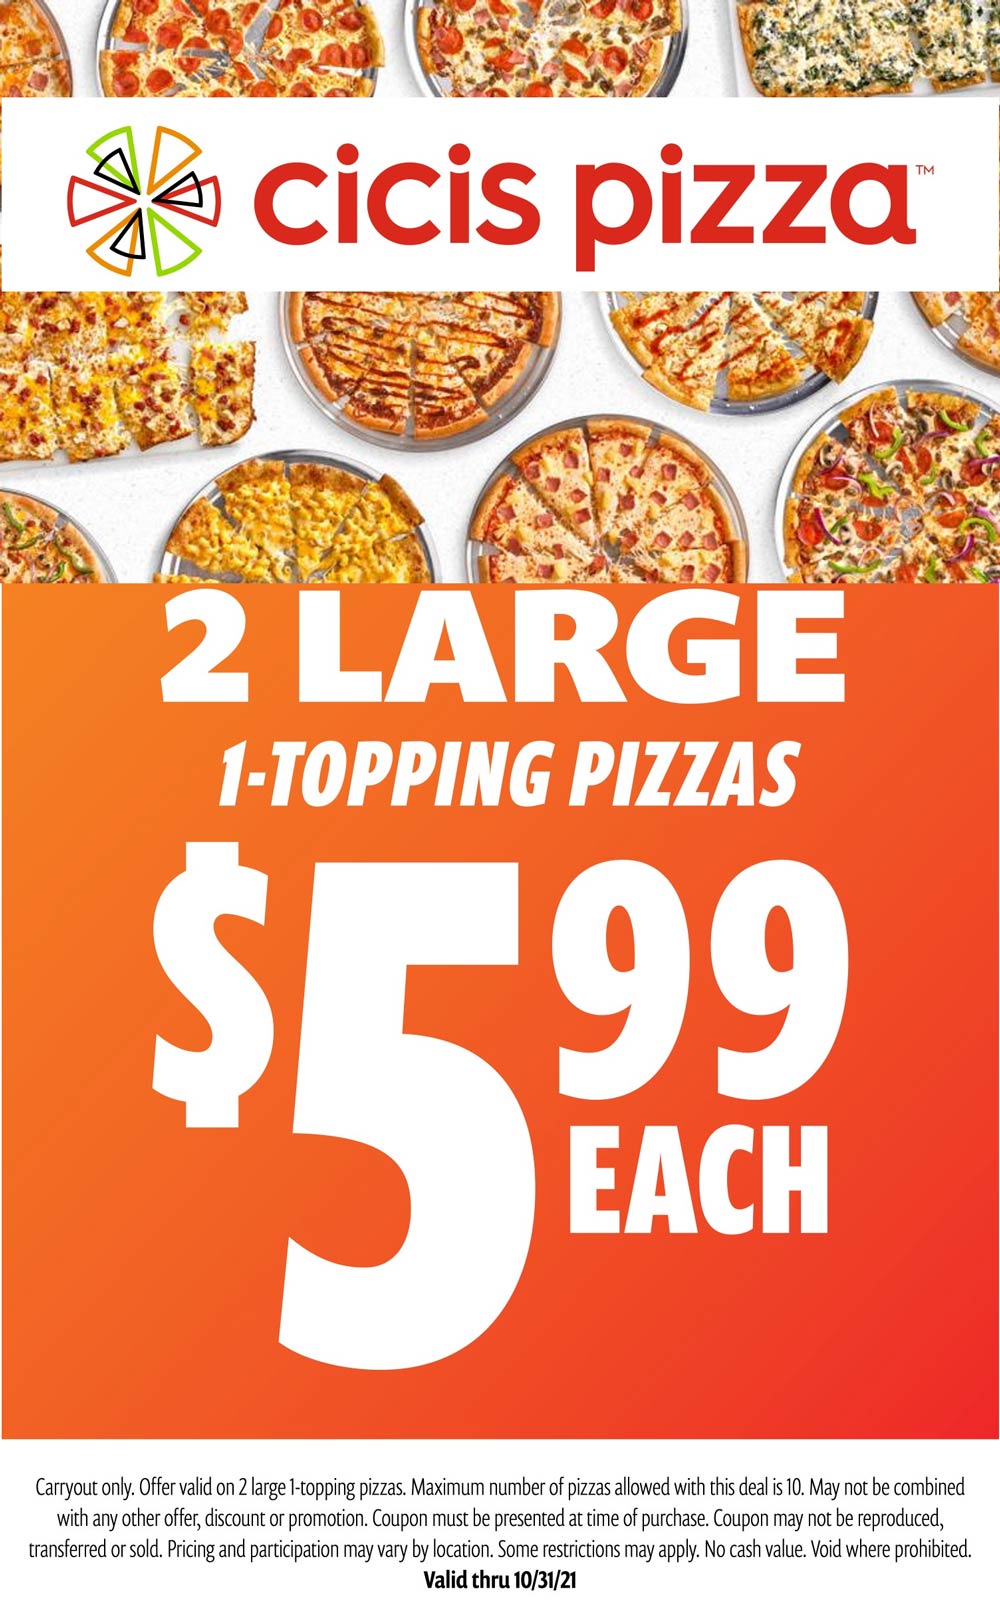 Cicis Pizza restaurants Coupon  $6 large 1-toppings at Cicis Pizza #cicispizza 